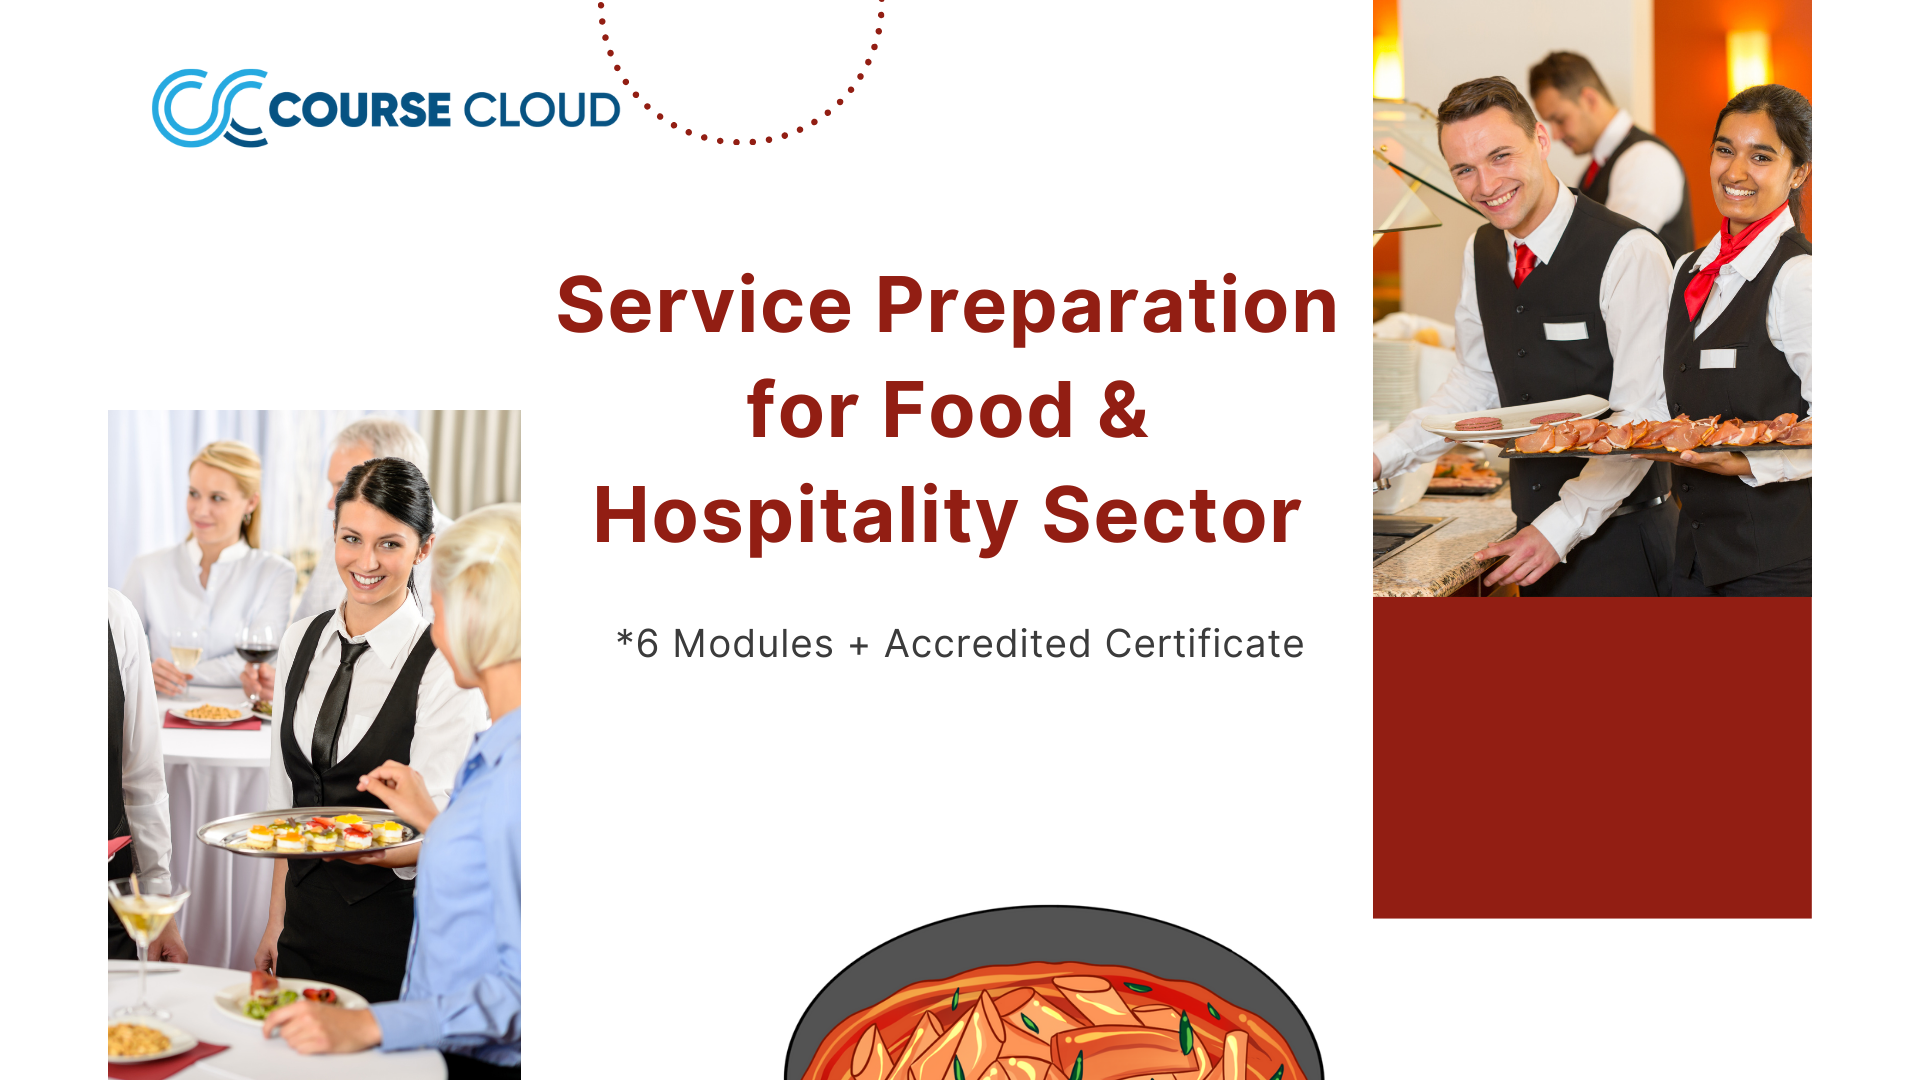 Service Preparation for Food & Hospitality Sector